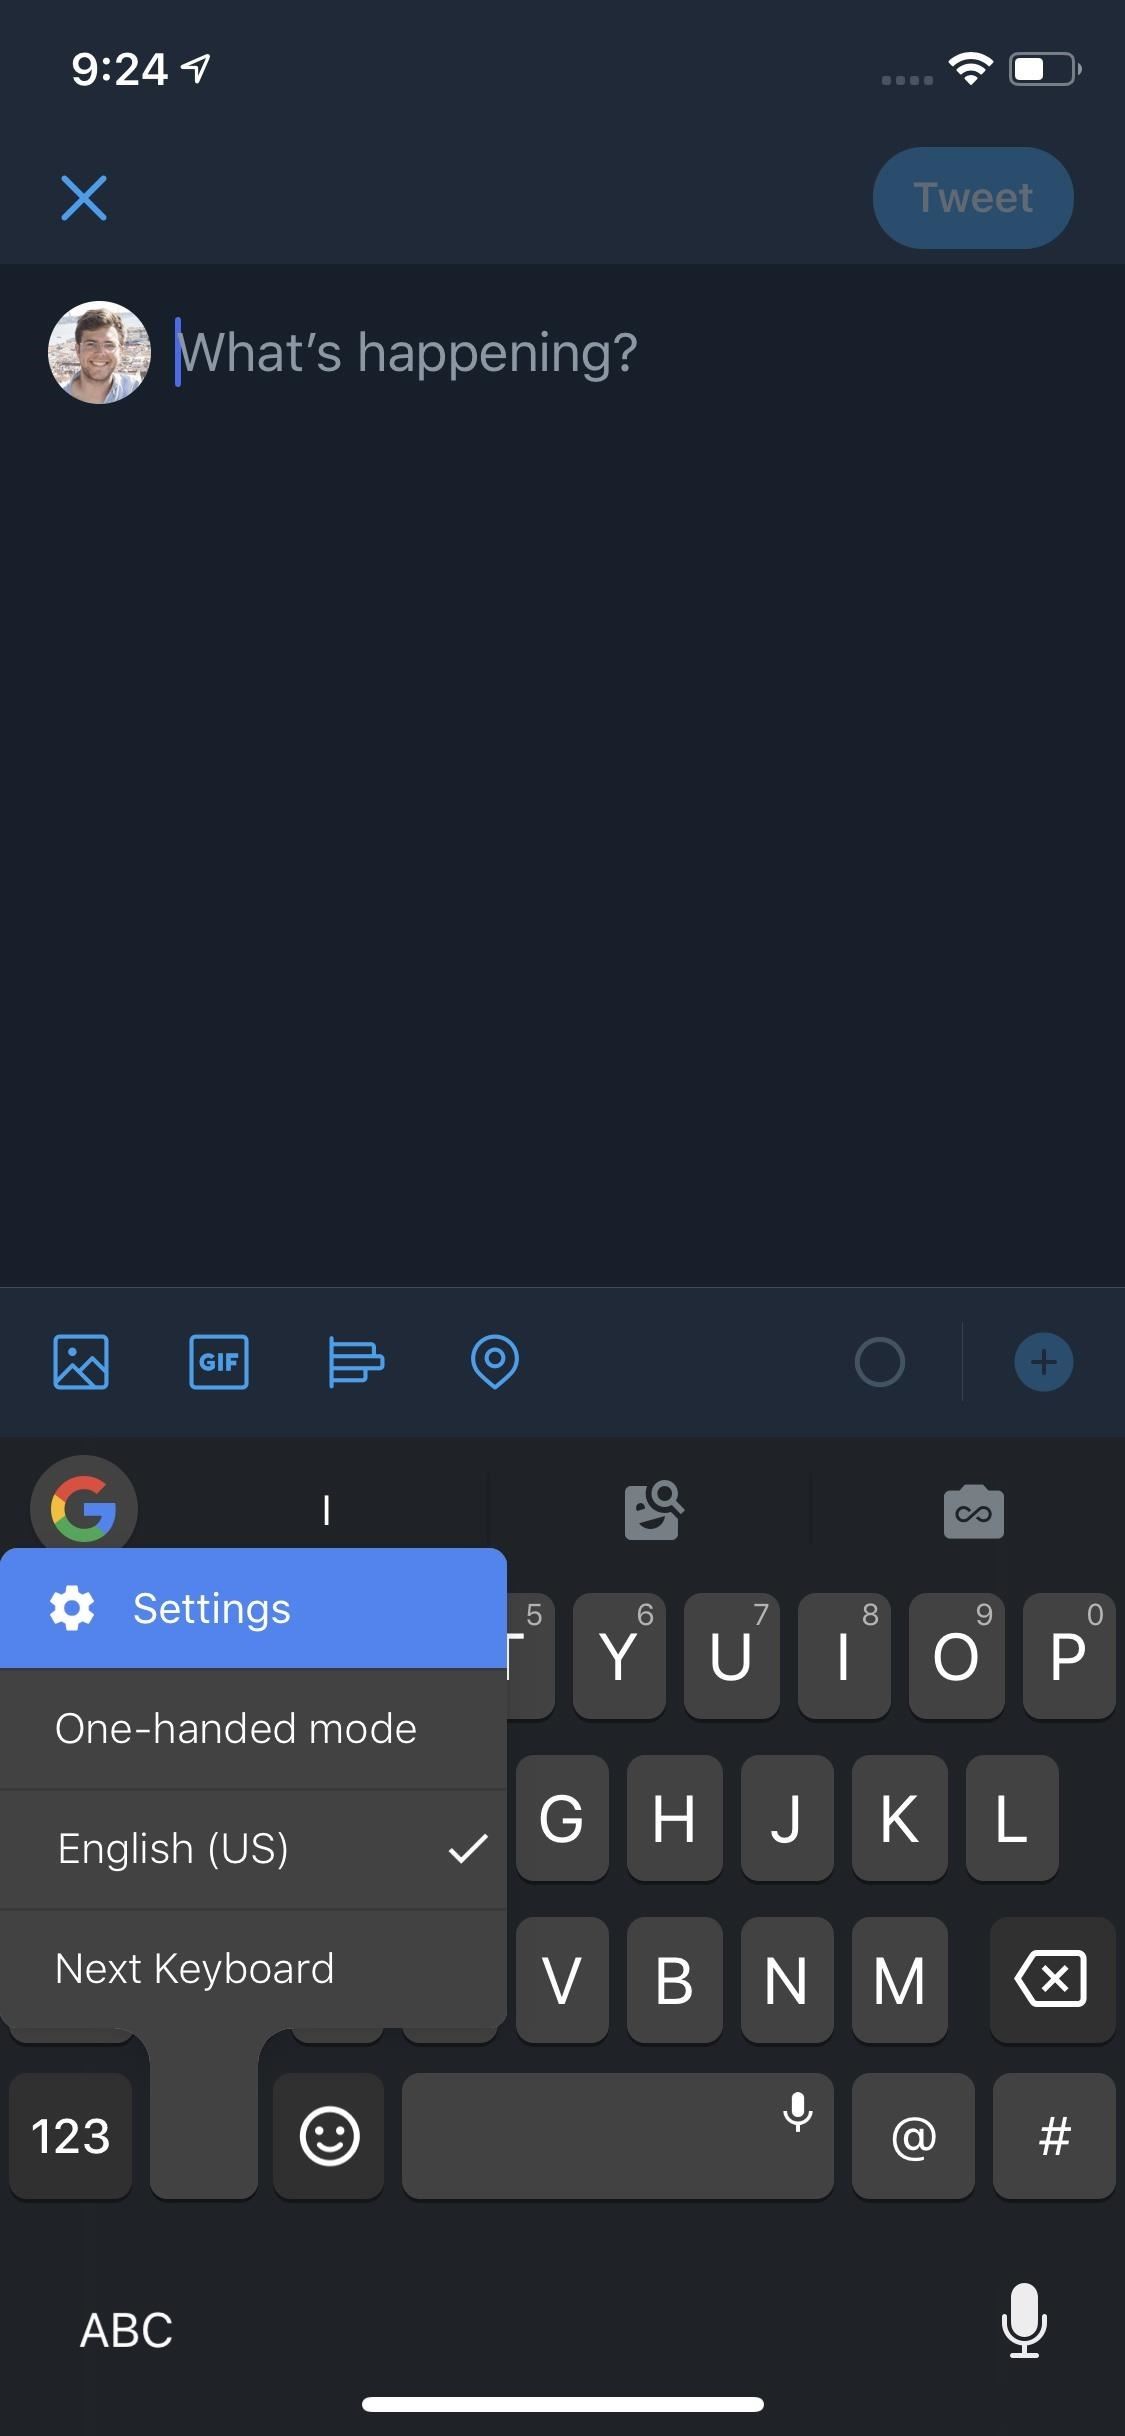 How to Get Haptic Feedback in Your iPhone Keyboard to Feel Everything You Type